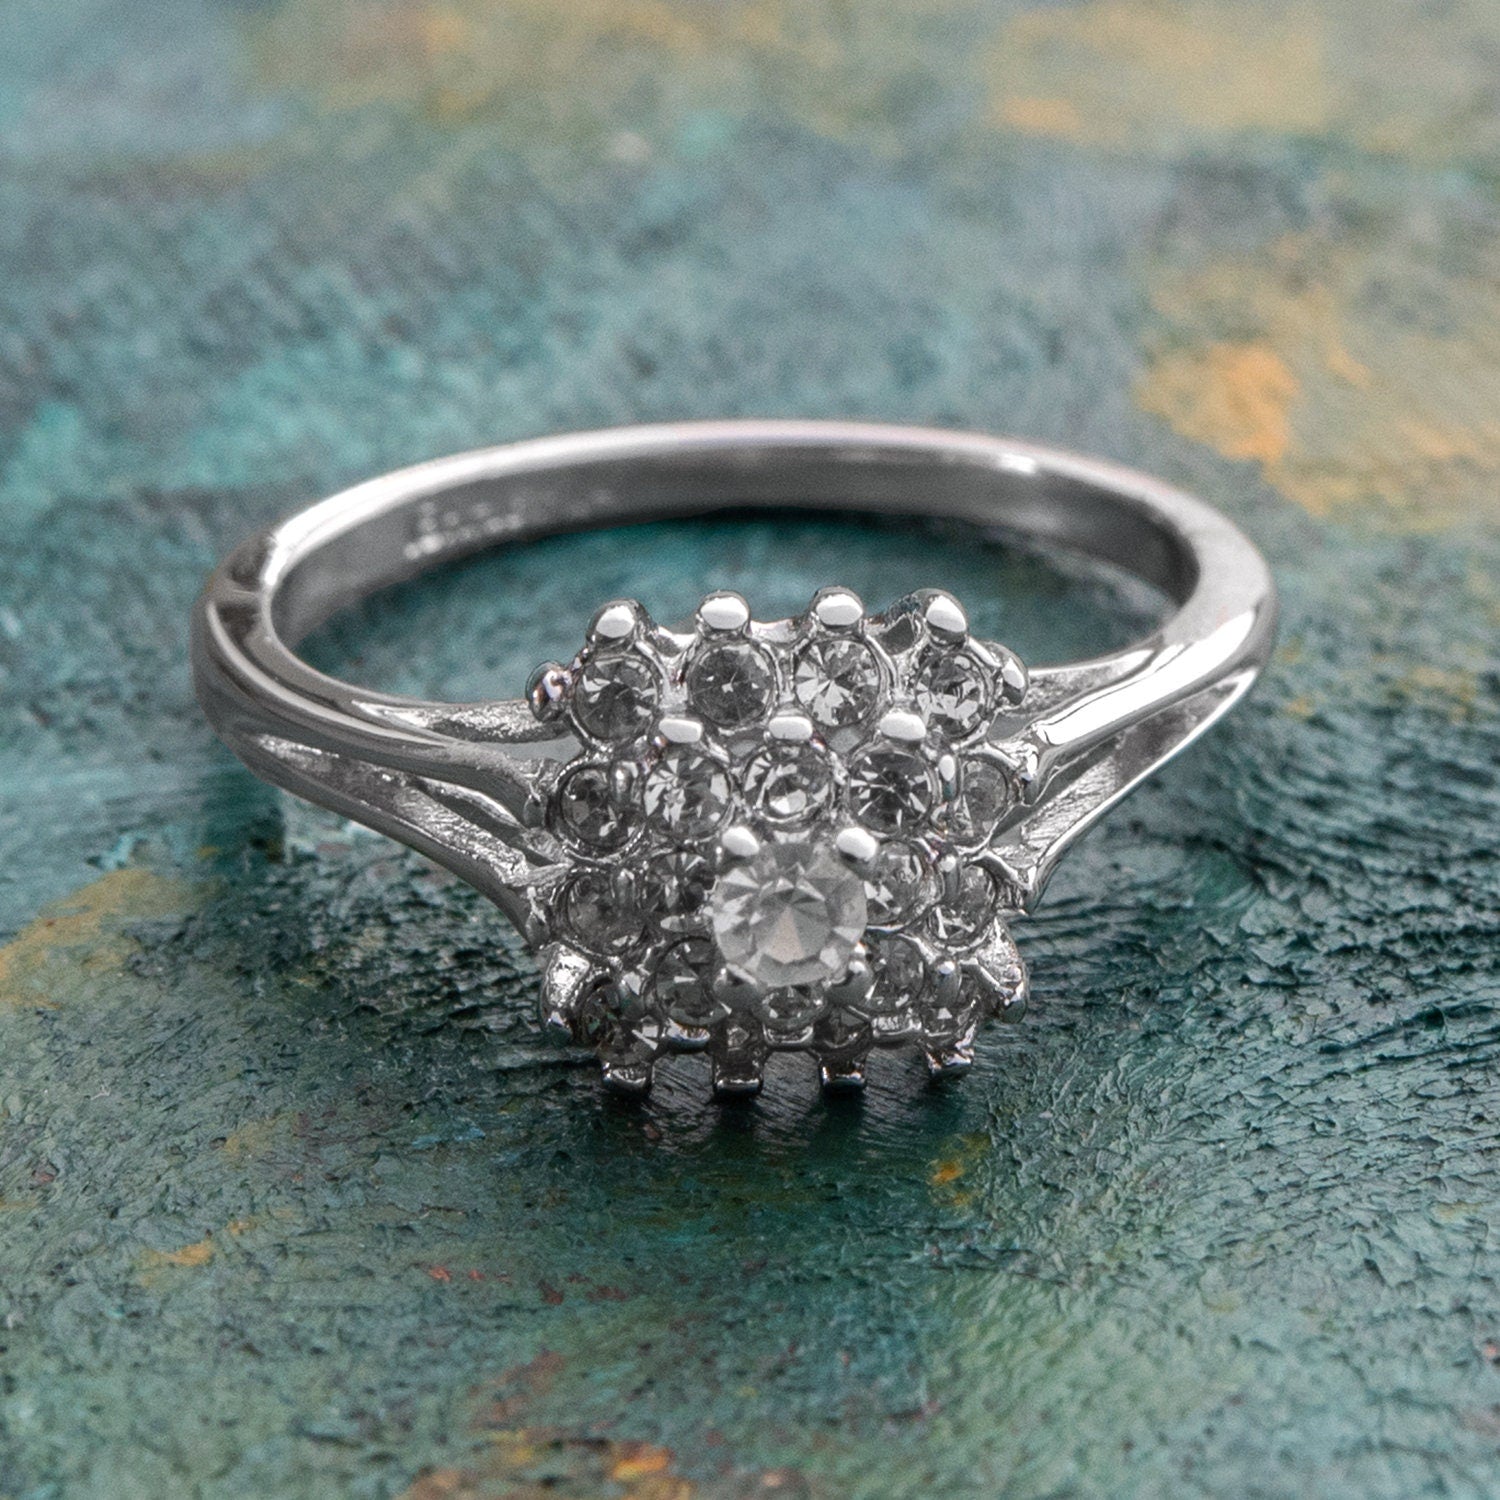 Vintage Ring Clear Swarovski Crystal Burst Ring 18k White Gold Silver Antique Womans Jewlery R885 - Limited Stock - Never Worn